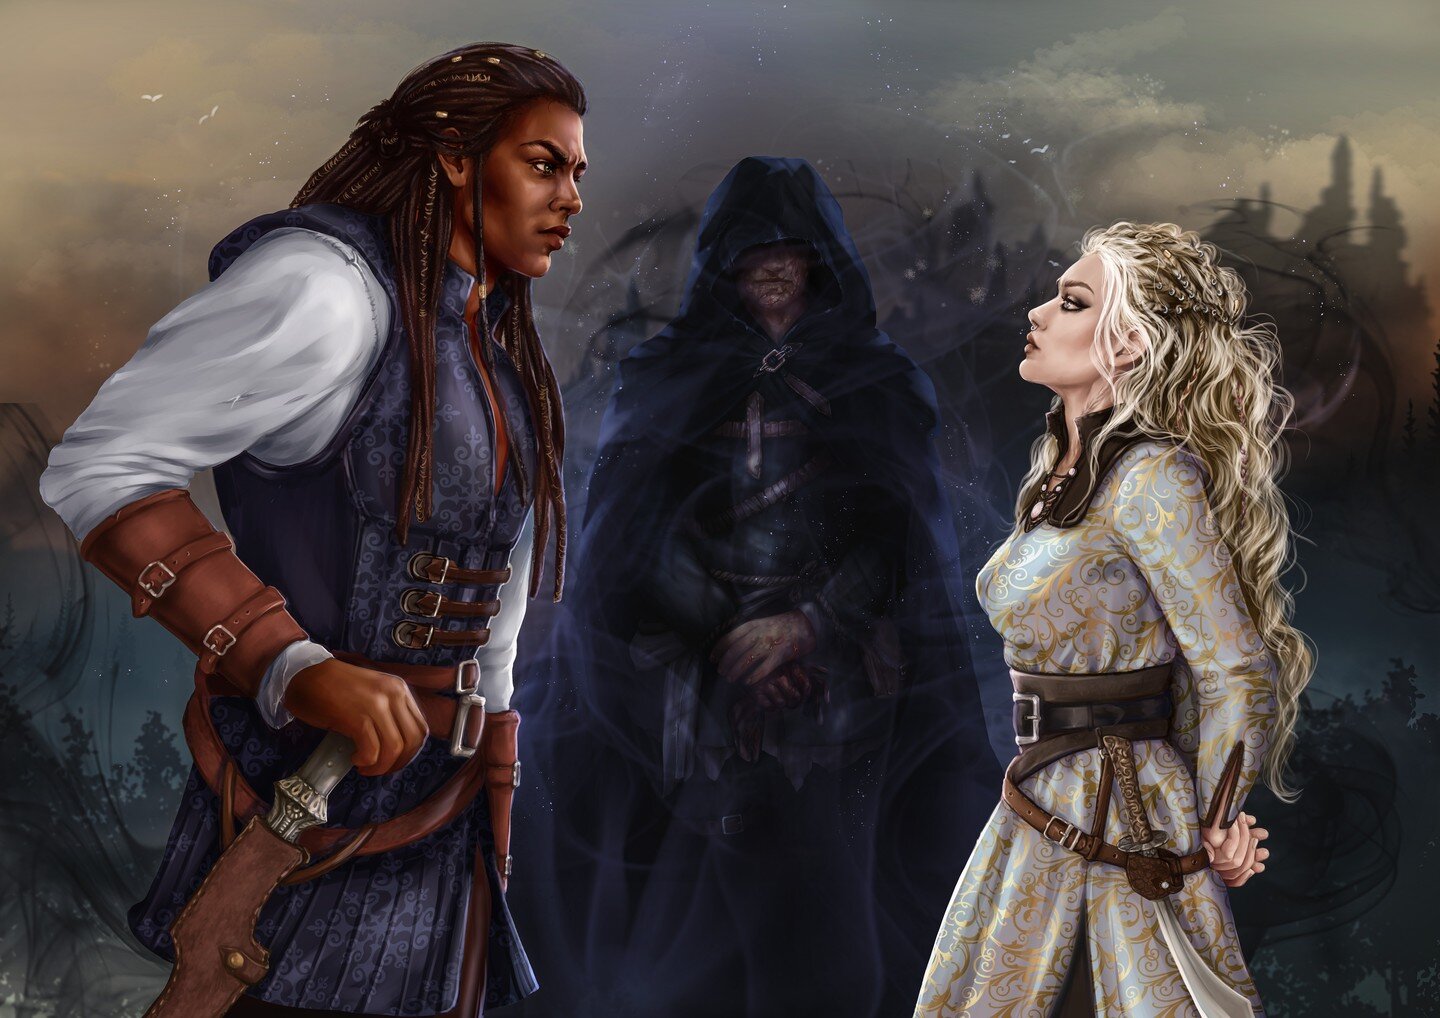 ⚔💥ART REVEAL💥⚔

Tad&ouml;m to the ever-talented @adamszkiart for this incredible depiction of the three contrasting POV's featured in @thehaidrenlegacy by @k.l.kolarich !!!

Just in time to help celebrate the much anticipated audiobook release of H